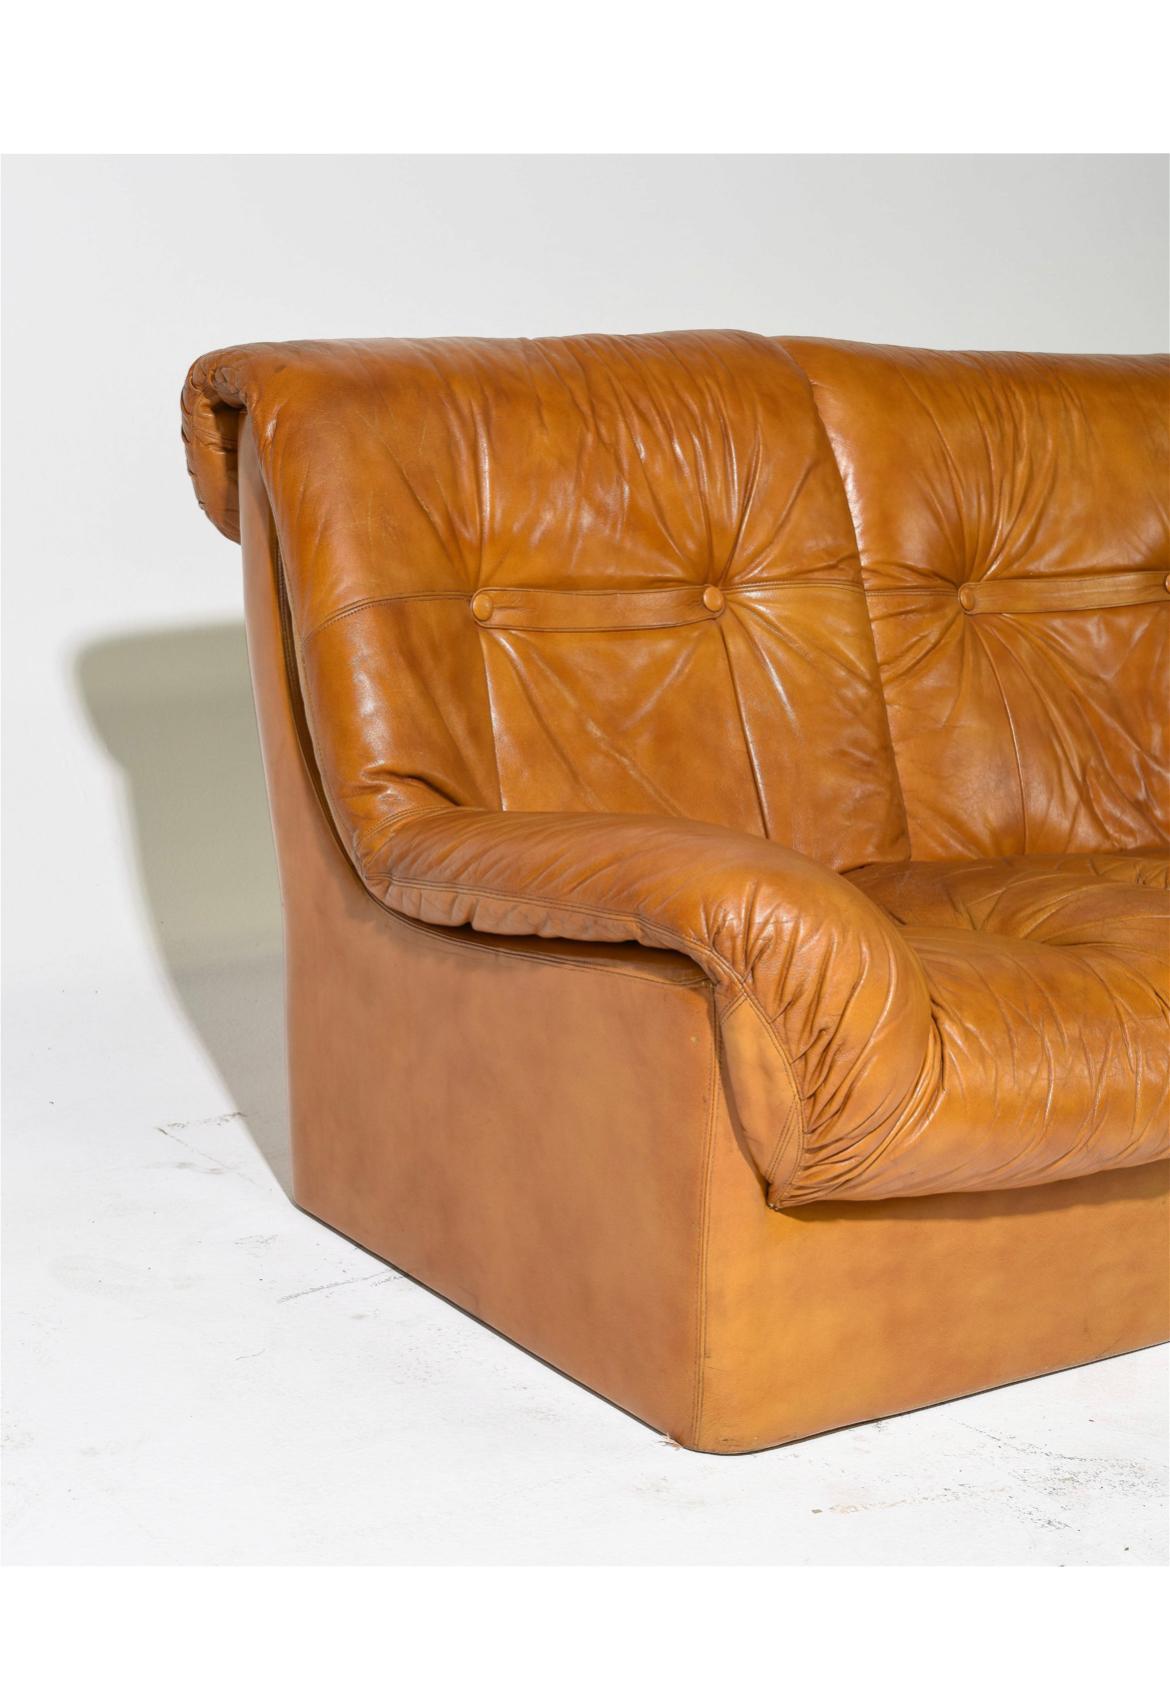 Mid Century Scandinavian Danish modern Tan Leather puffy 3 seat Sofa. Nice vintage condition broken in leather gently used. Soft tan brown leather with Puffy design. Nice Patina. Made in Denmark. Located in Brooklyn NYC.

86